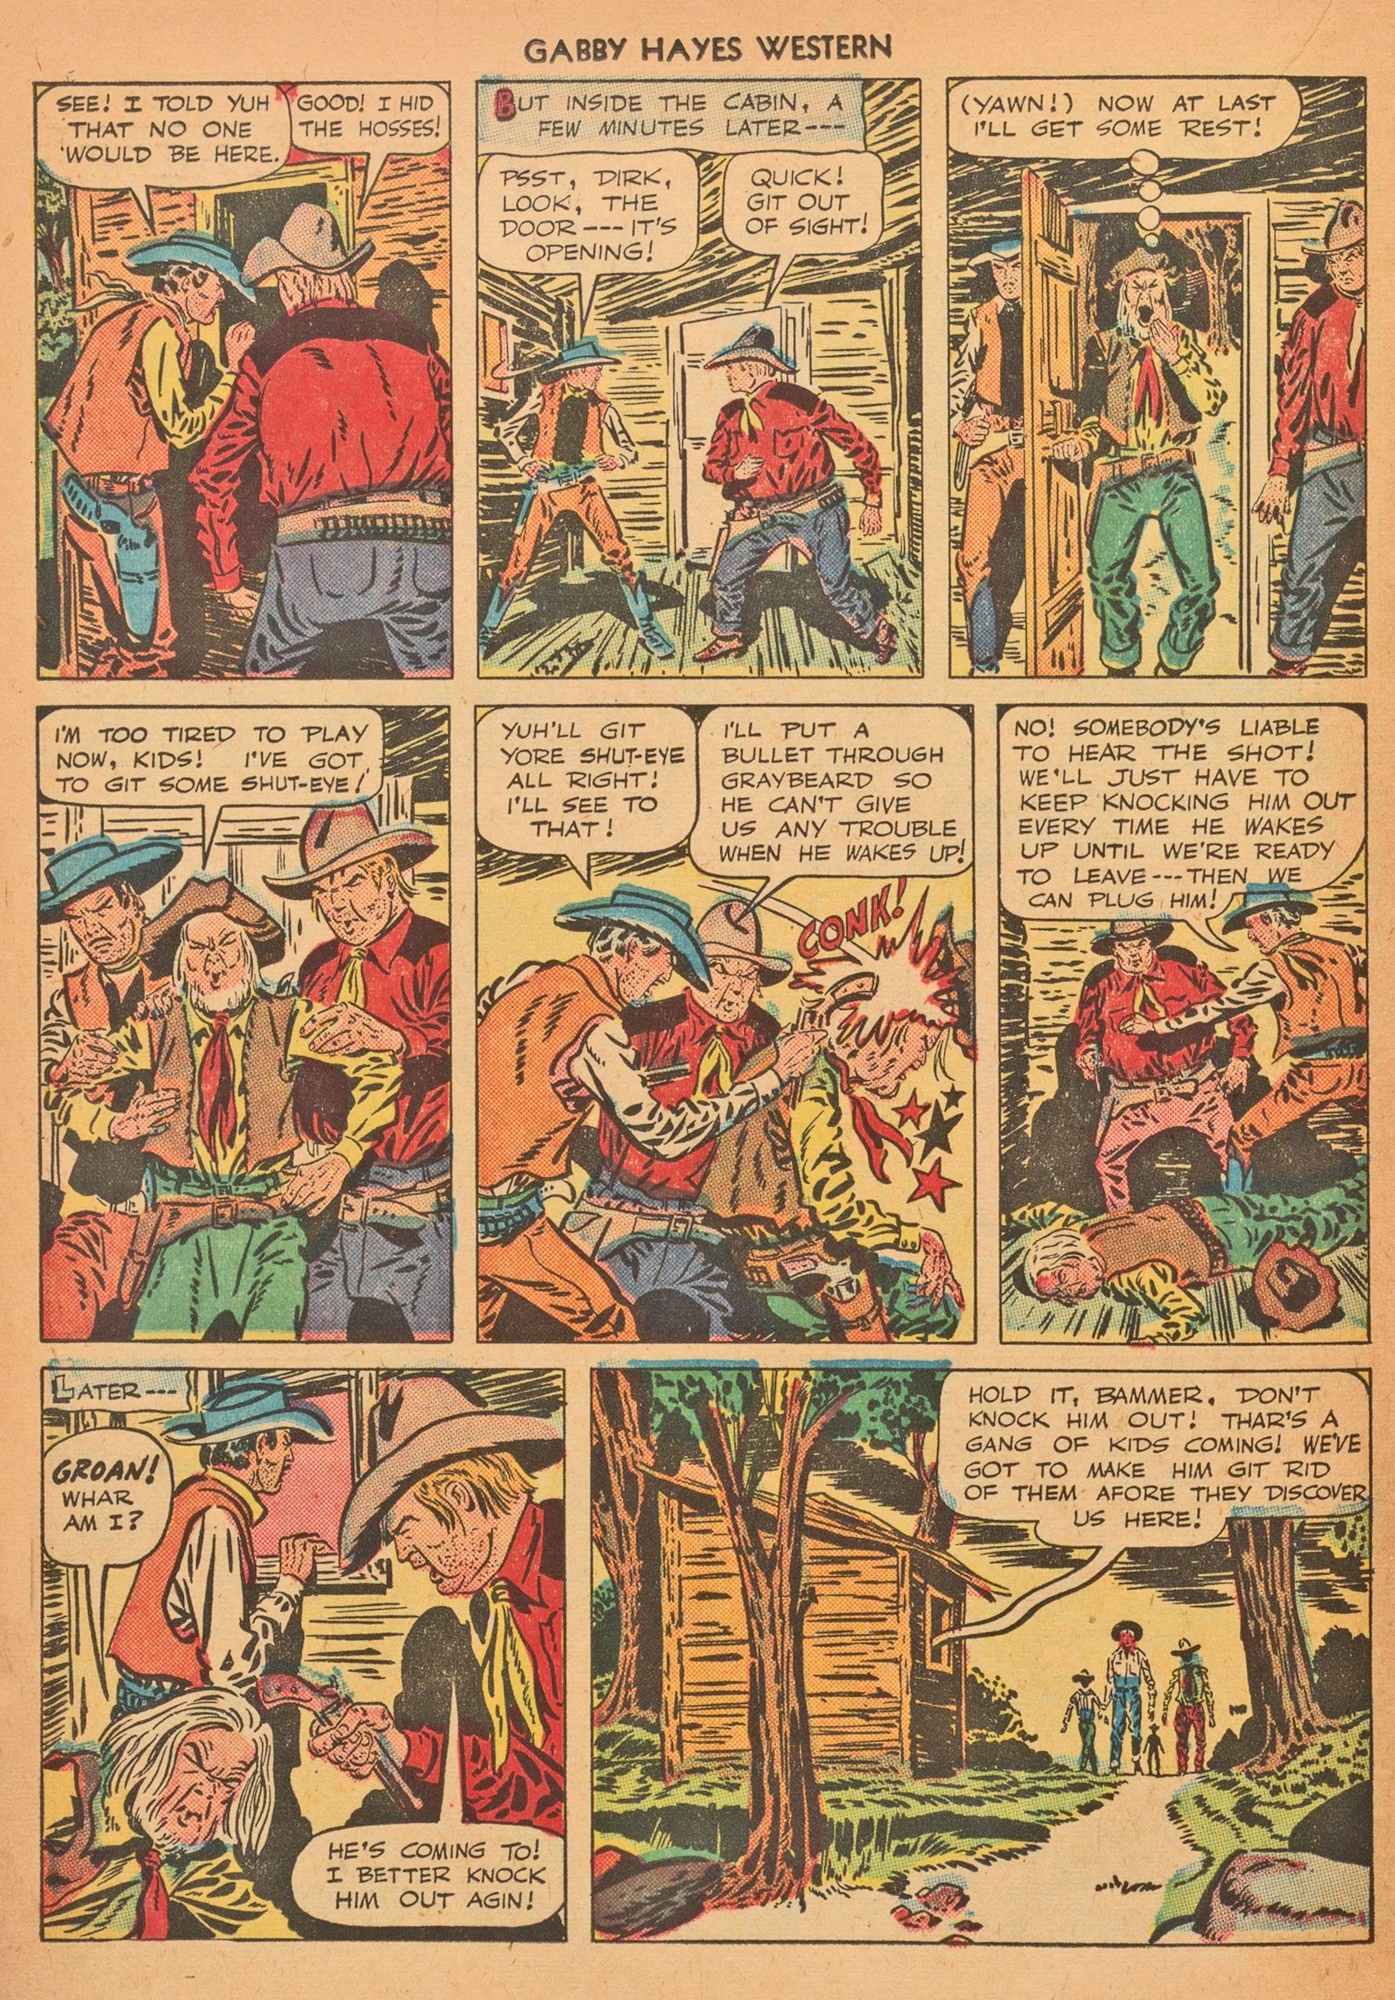 Read online Gabby Hayes Western comic -  Issue #12 - 22